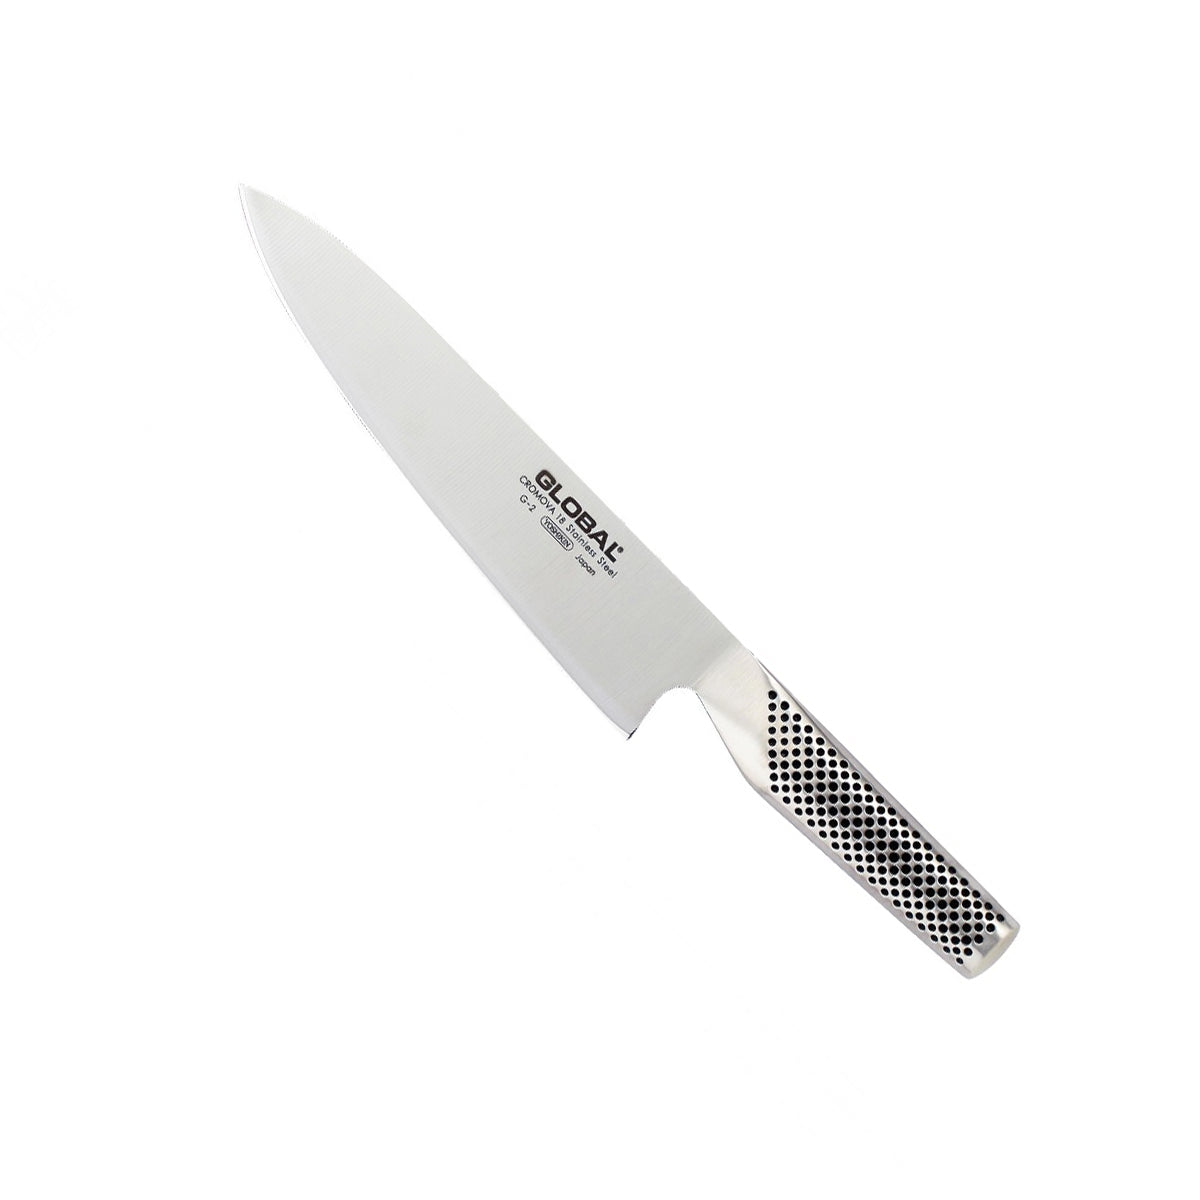 Global G-2 8 Inch Chef's Knife Review